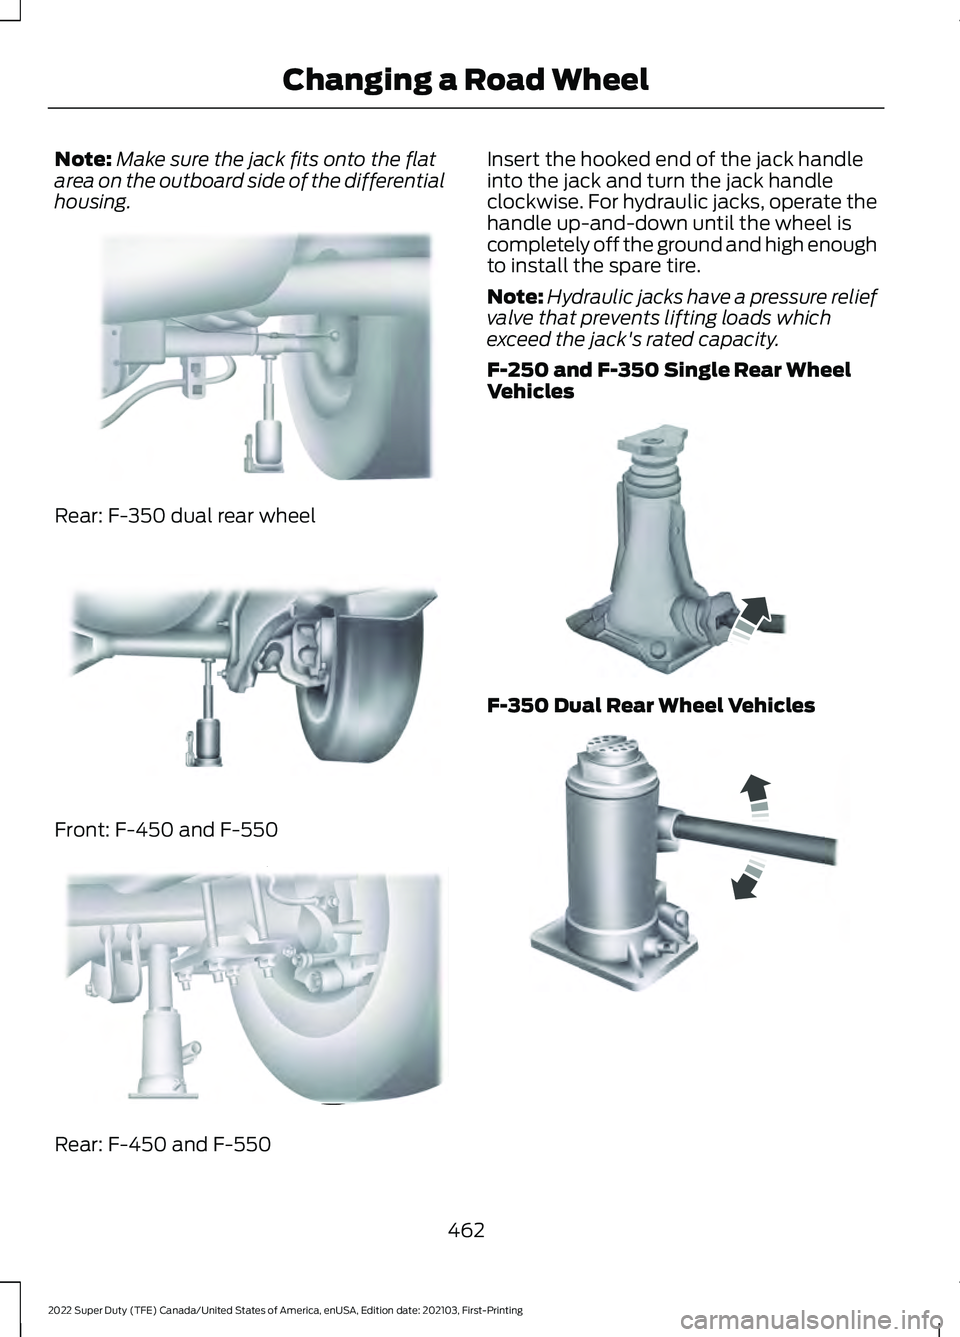 FORD F-550 2022  Owners Manual Note:
Make sure the jack fits onto the flat
area on the outboard side of the differential
housing. Rear: F-350 dual rear wheel
Front: F-450 and F-550
Rear: F-450 and F-550 Insert the hooked end of the